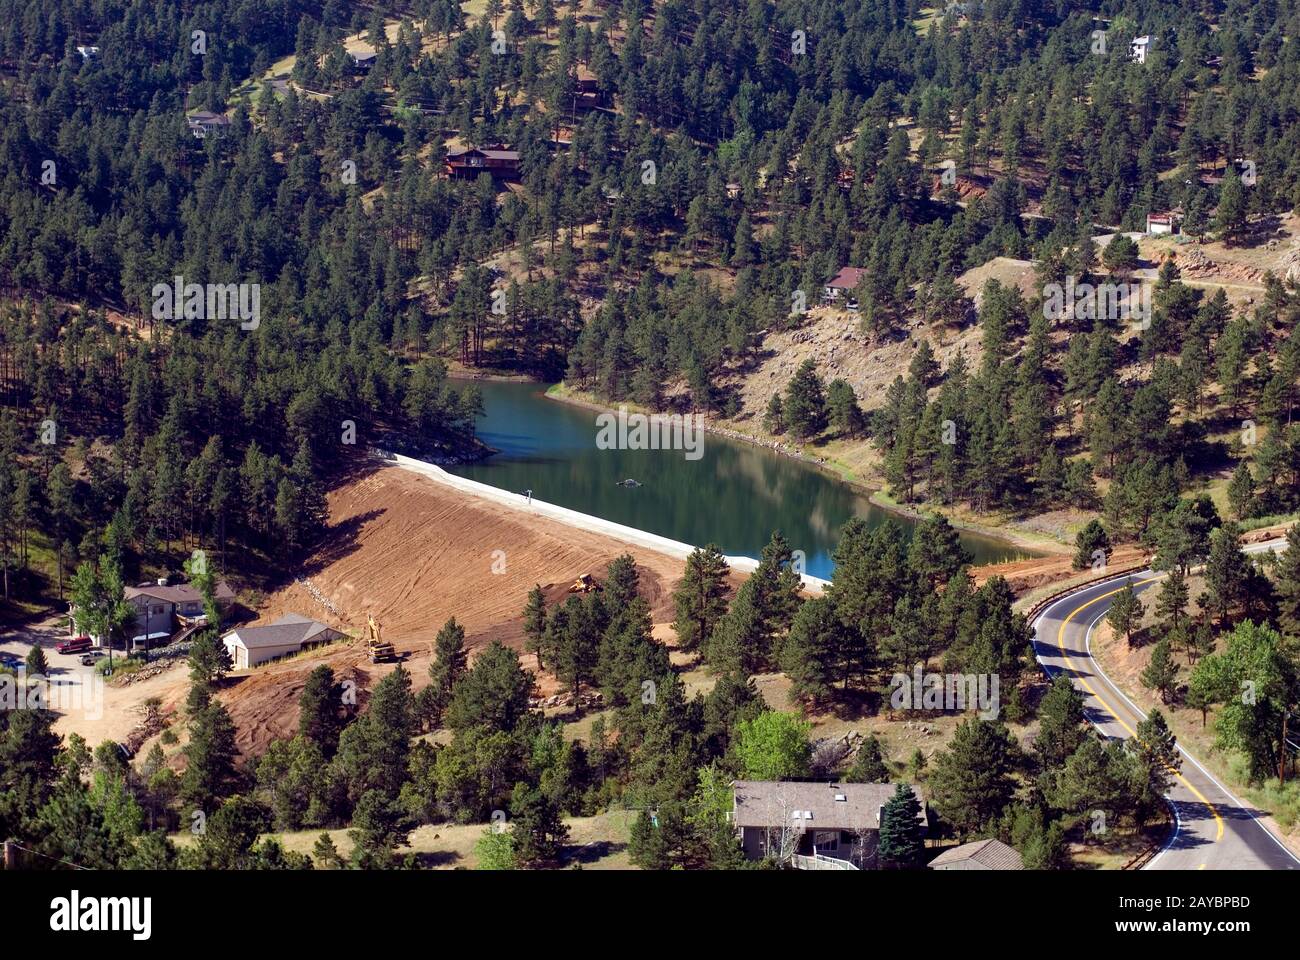 This reservoir serves Pine Brook Hills, a small mountain community west of Boulder with 400 homes. Water first poured into the reservoir in 2006. Stock Photo